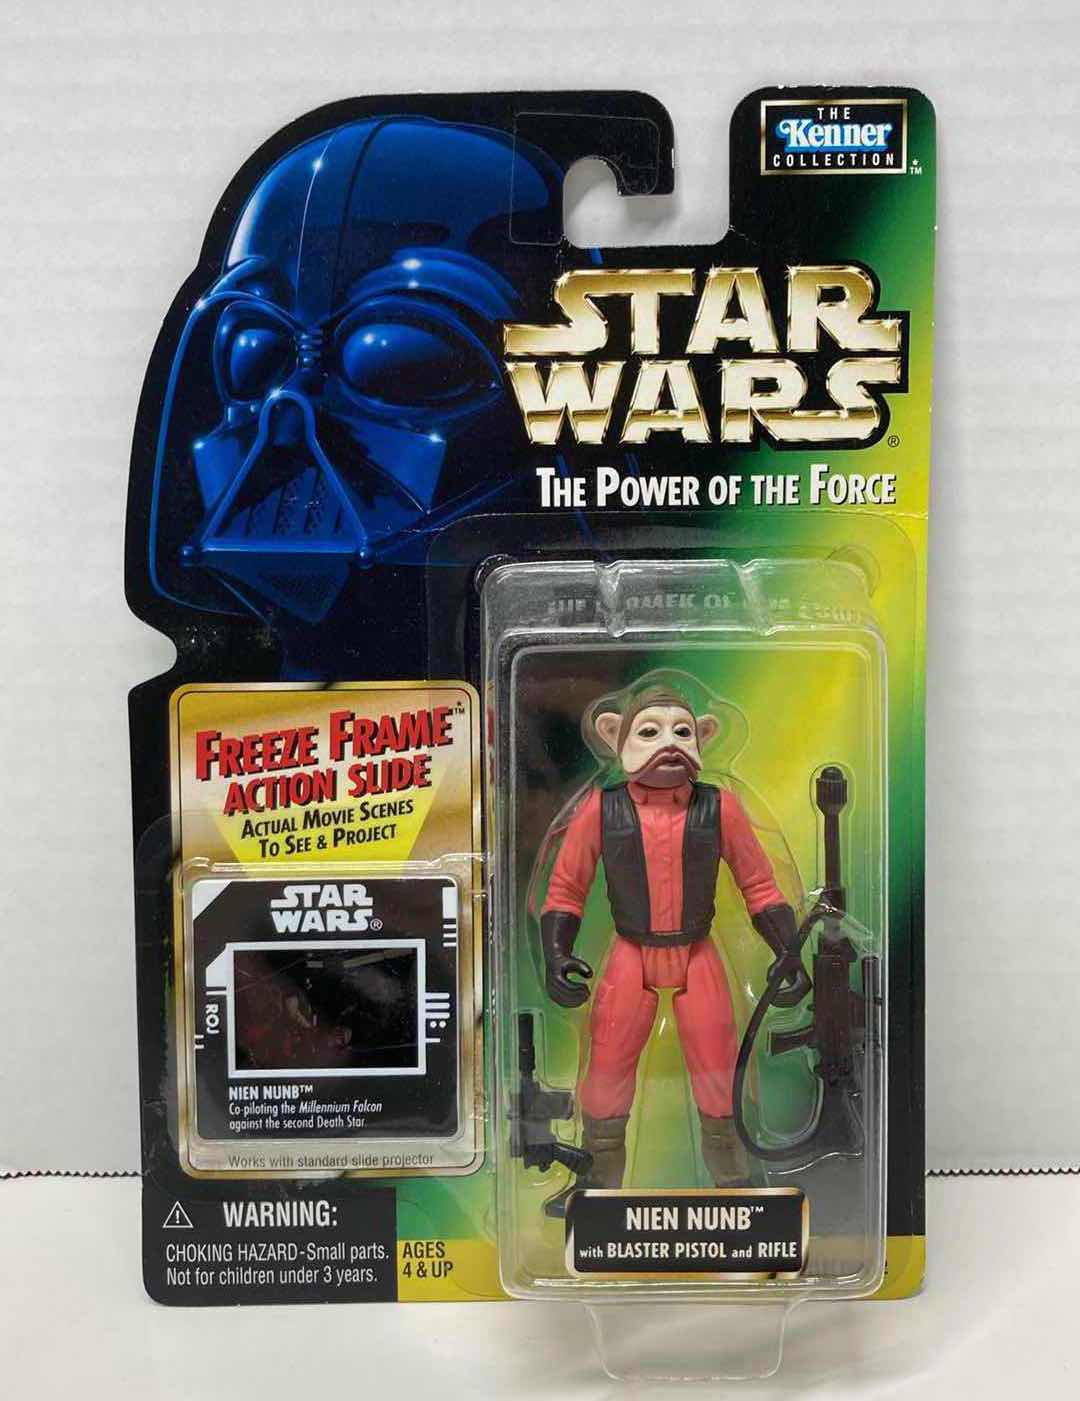 Photo 1 of NEW STAR WARS THE POWER OF THE FORCE ACTION FIGURE, NIEN NUNB W BLASTER PISTOL, RIFLE & FREEZE FRAME ACTION SLIDE